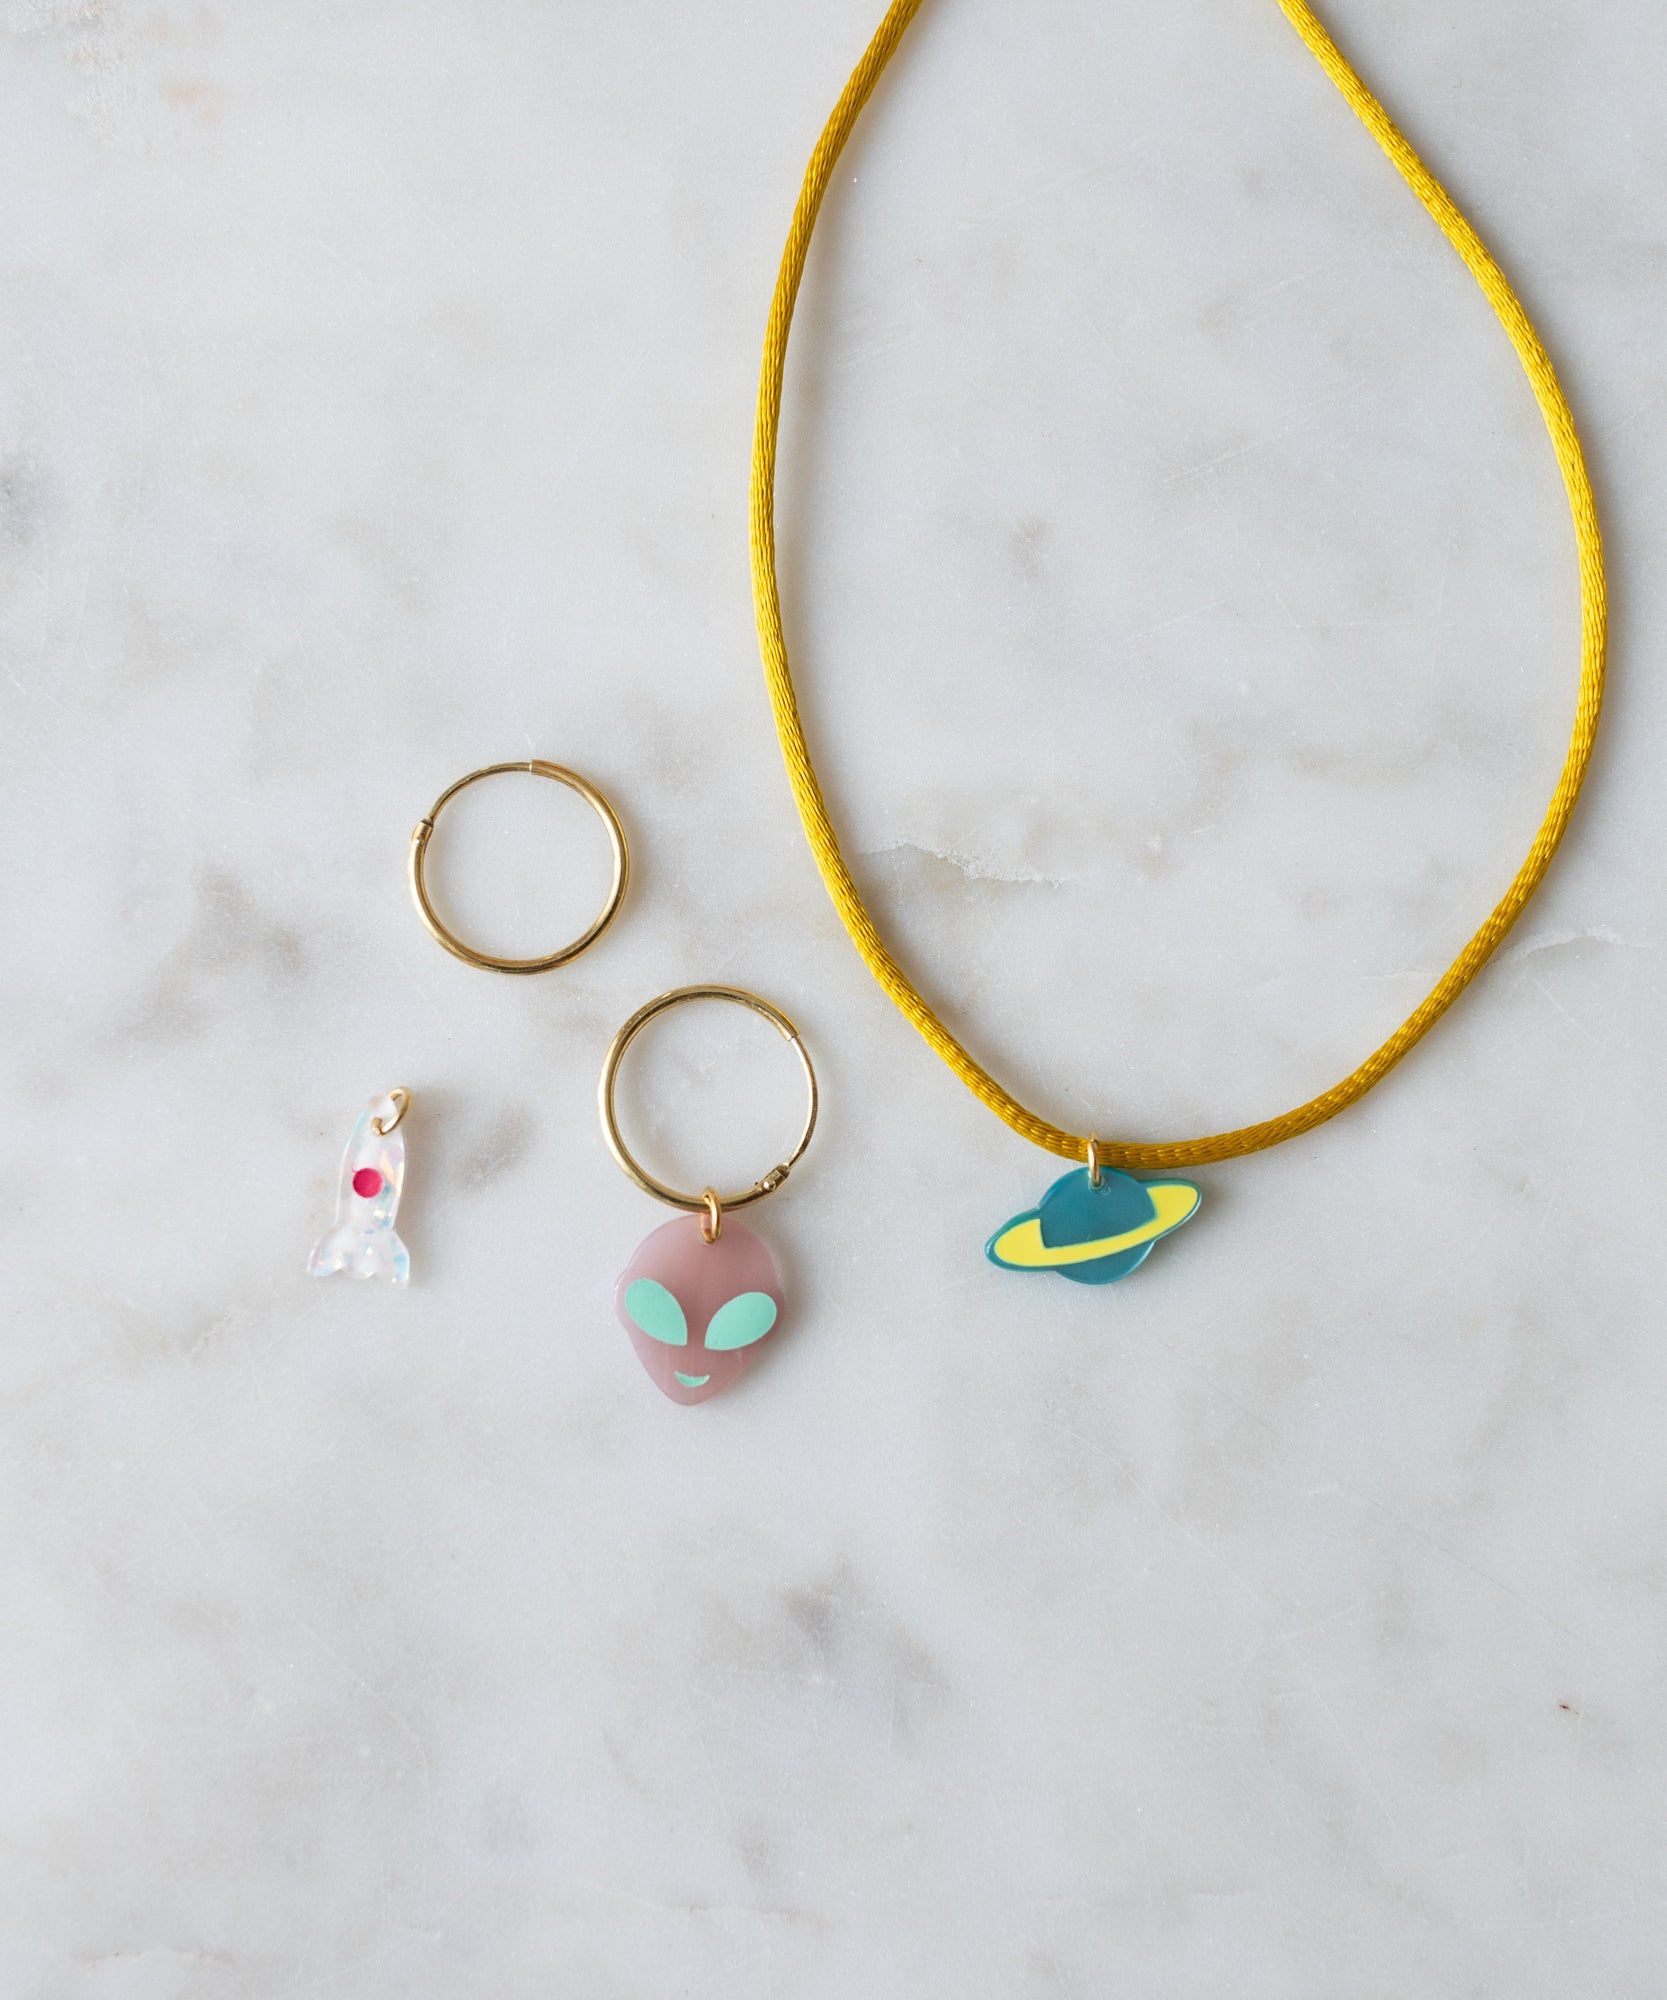 Rocket Charm necklace and matching earrings with colorful, abstract pendants on a marble surface crafted as DIY jewelry by WALD World.